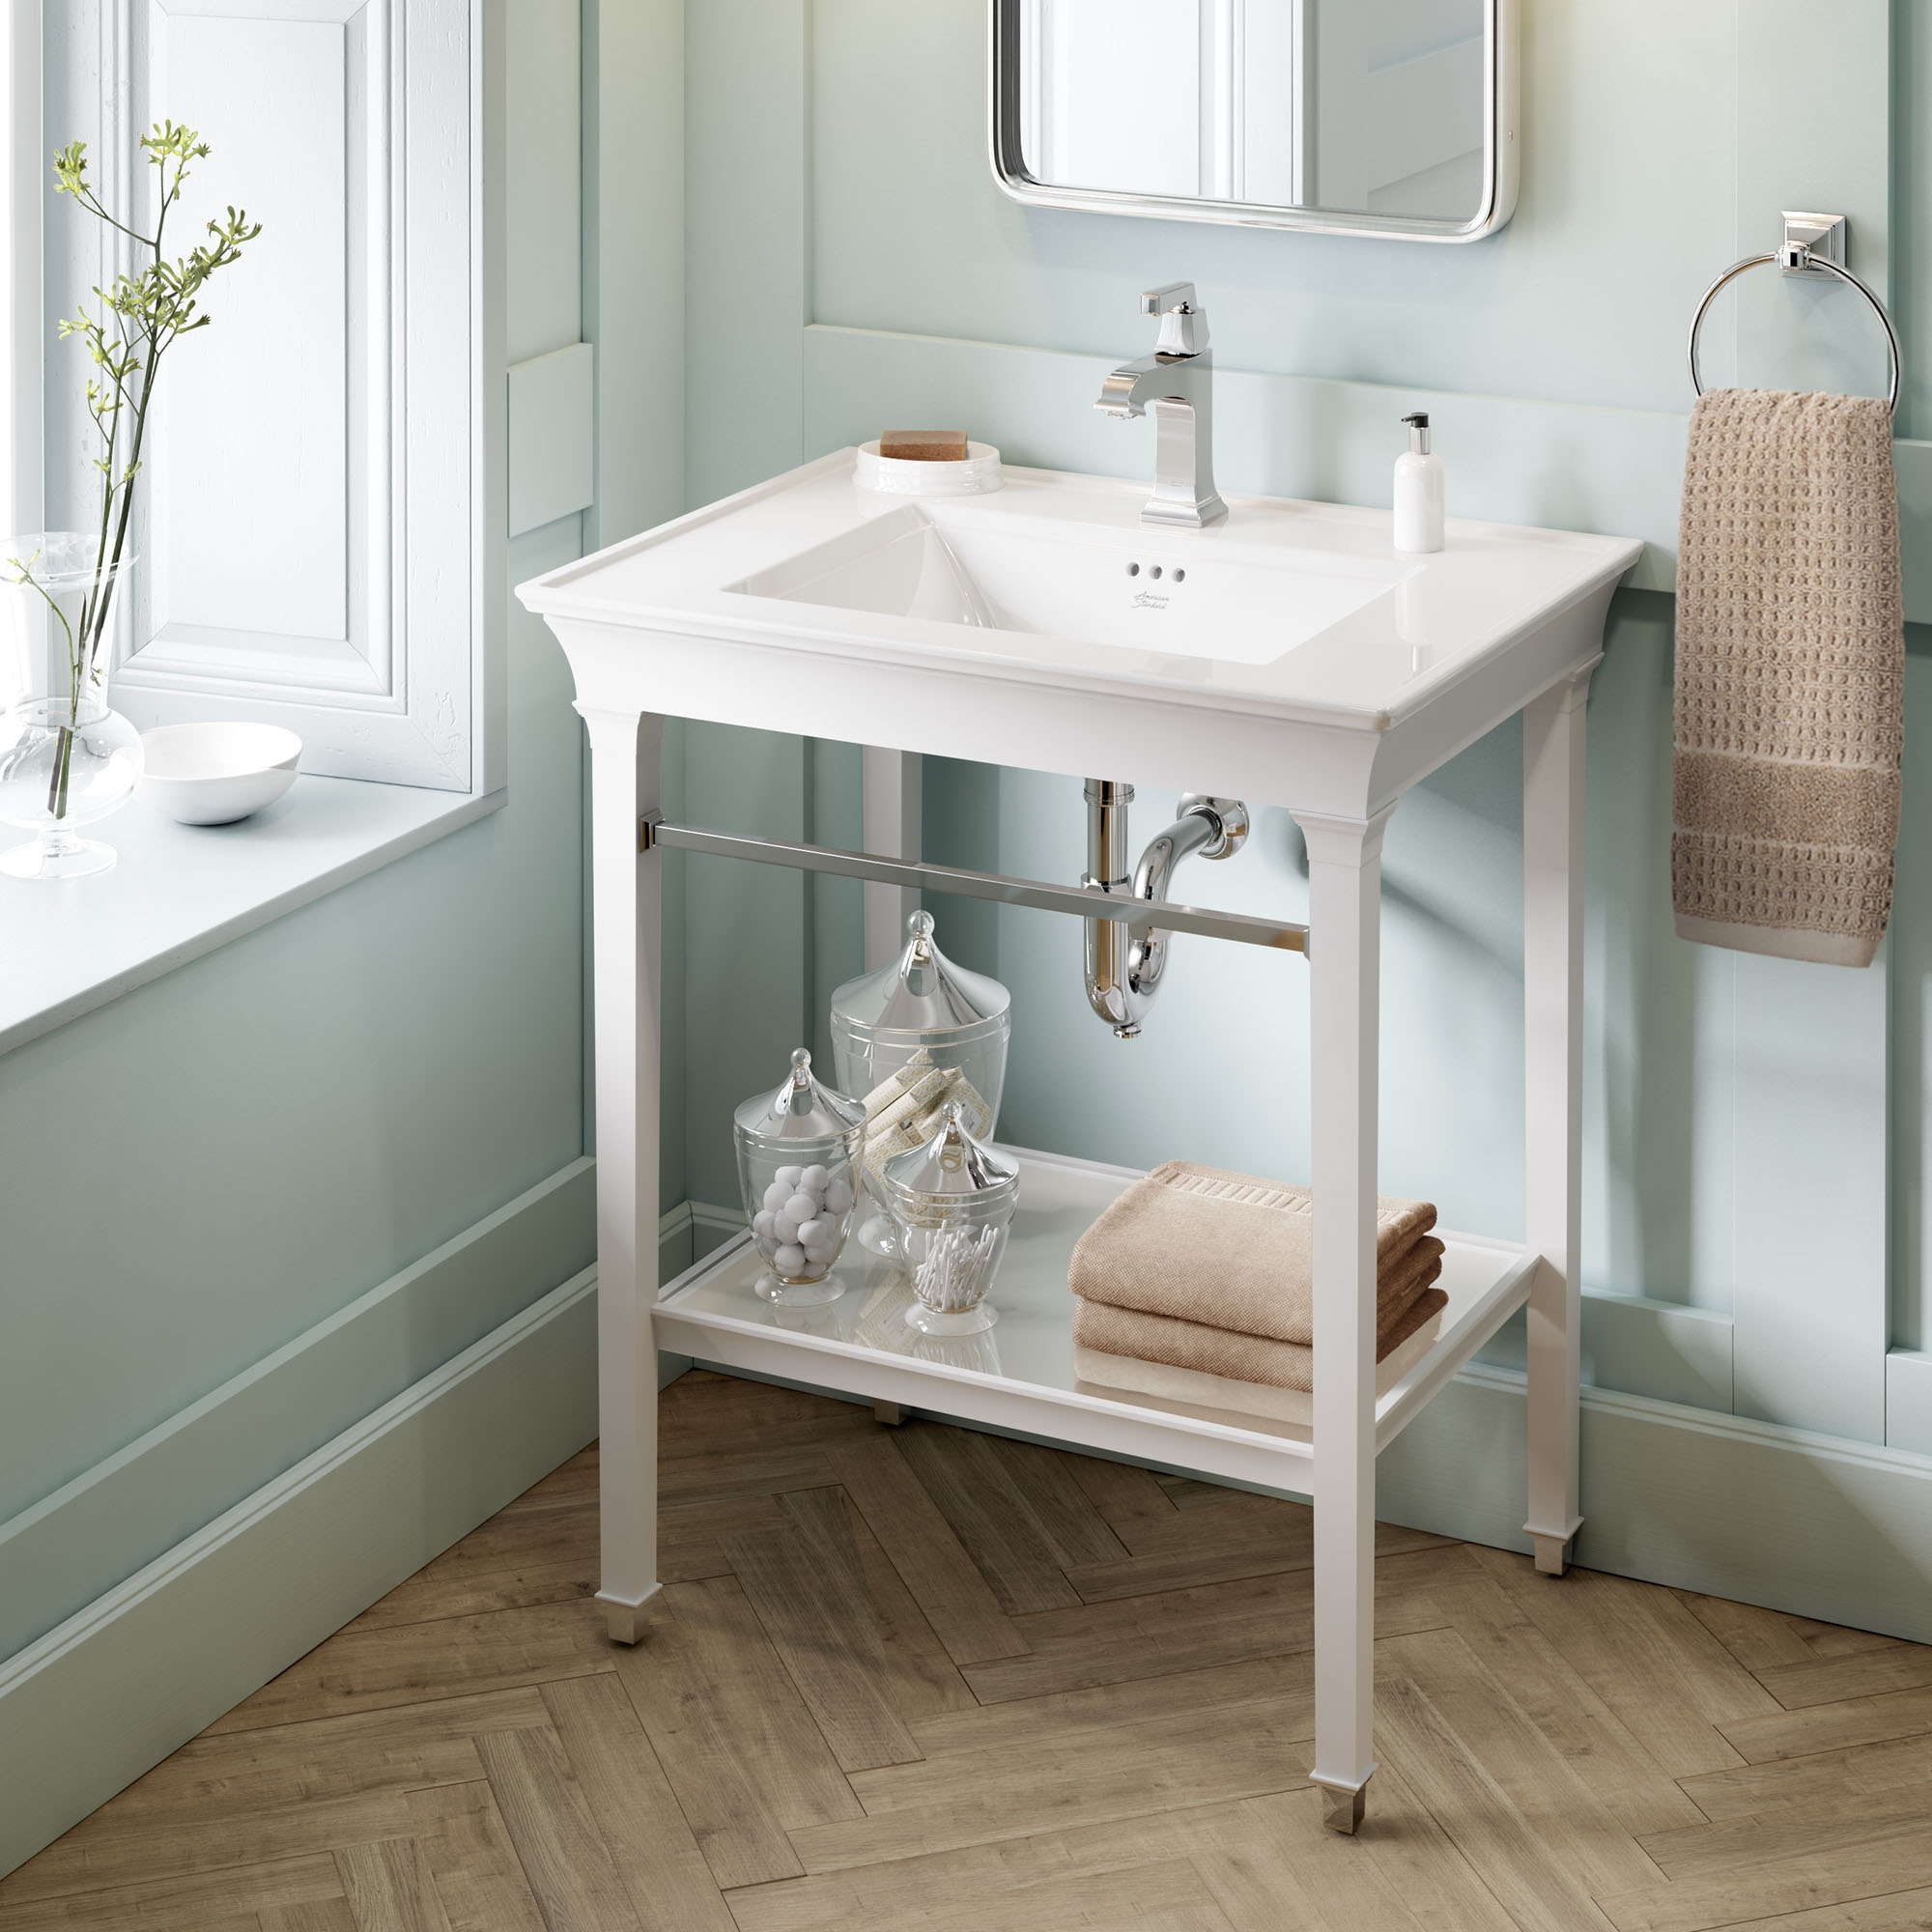 Town Square™ S Washstand